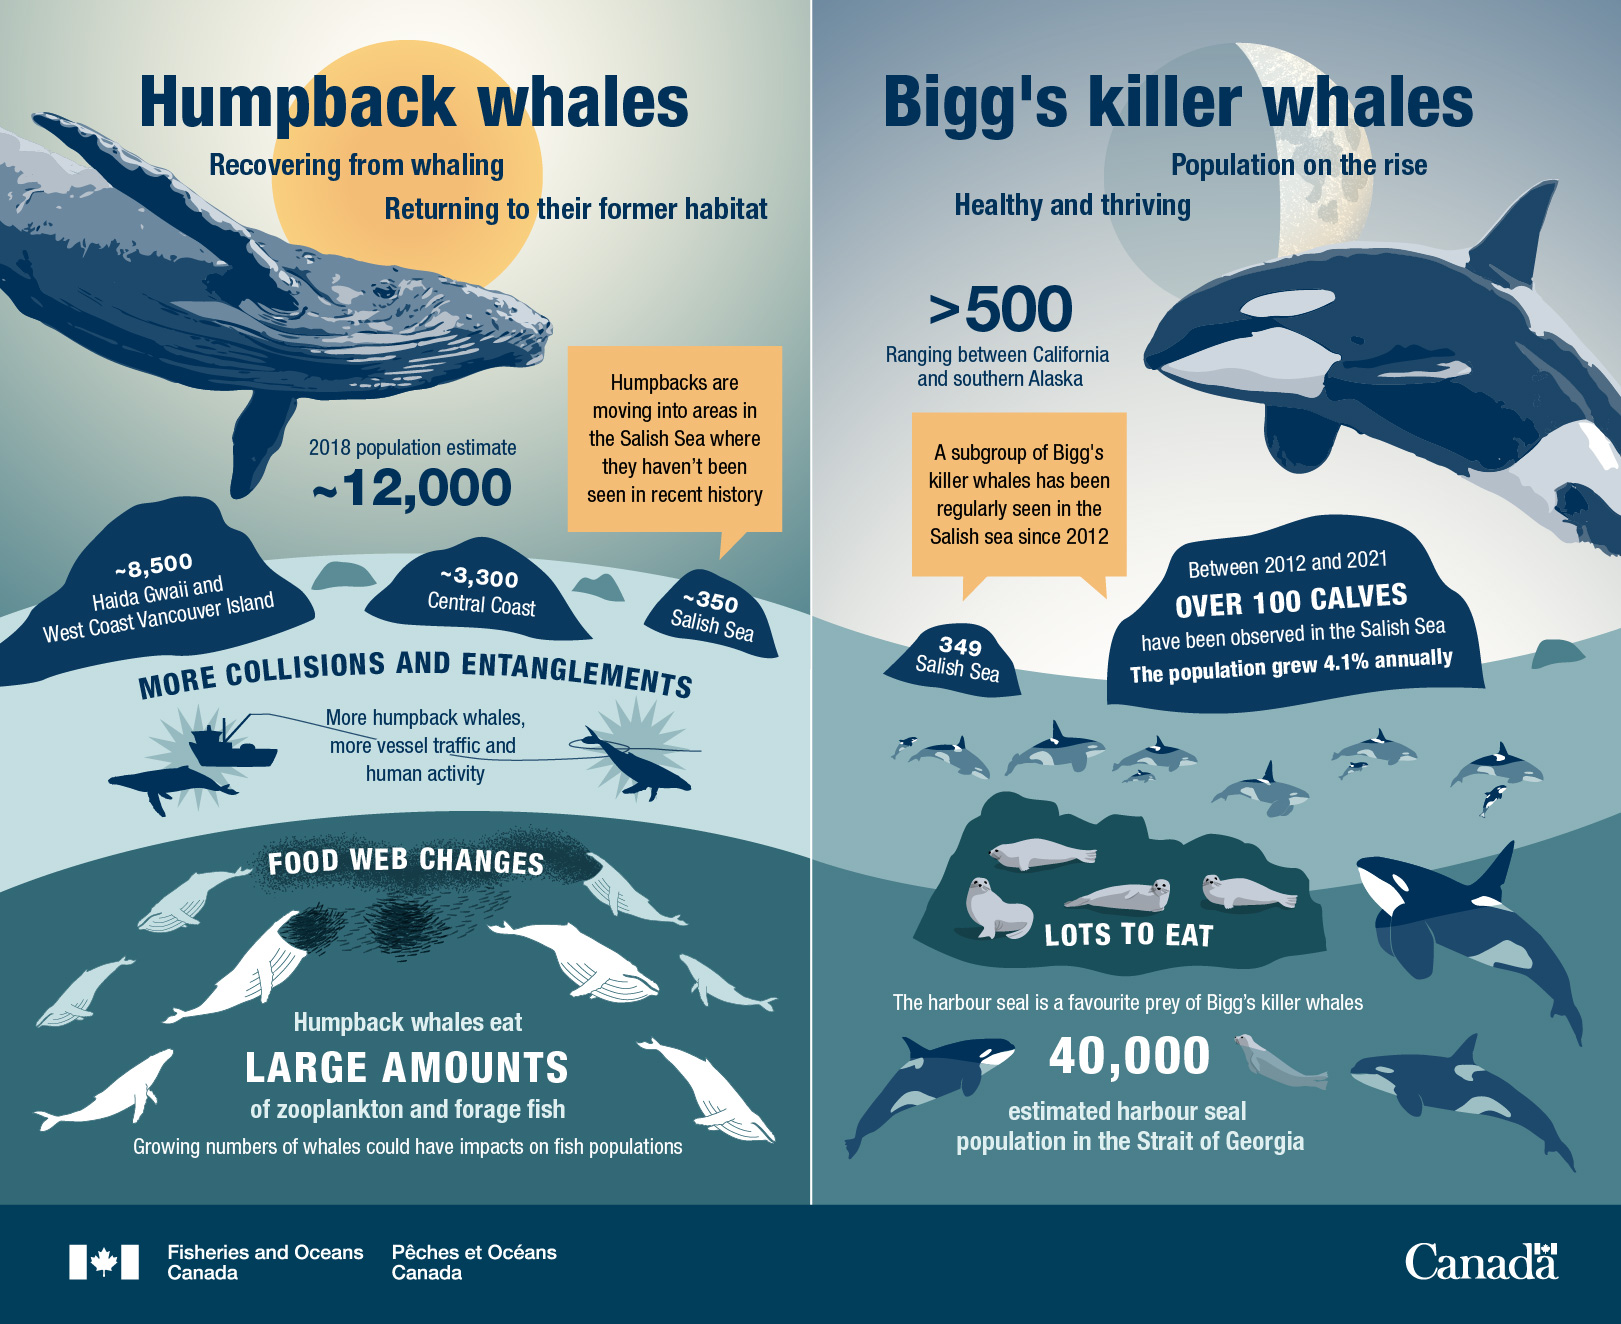 Canada’s Oceans Now, Pacific Ecosystems 2021 - Humpback whales recovering, Bigg’s whales on the rise